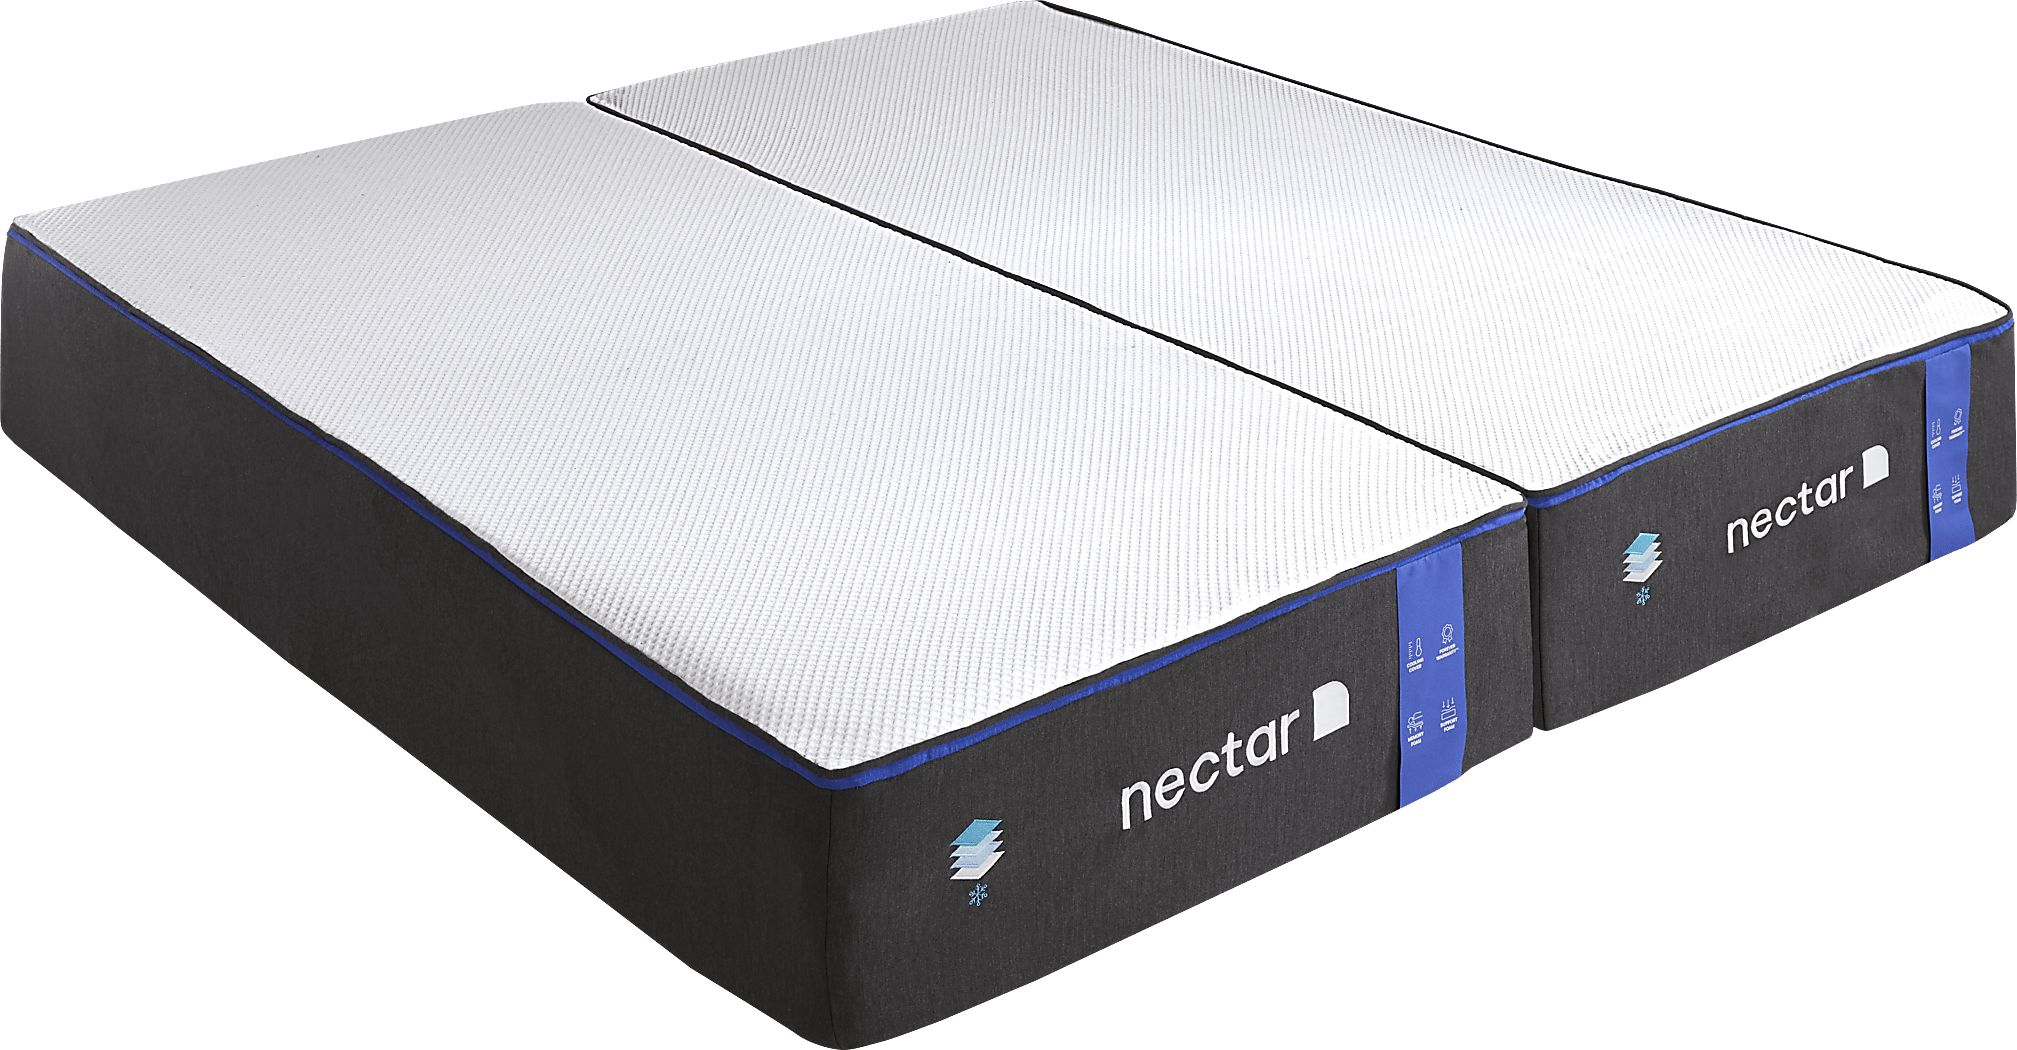 Nectar Classic 4.0 Split King Mattress | Rooms to Go